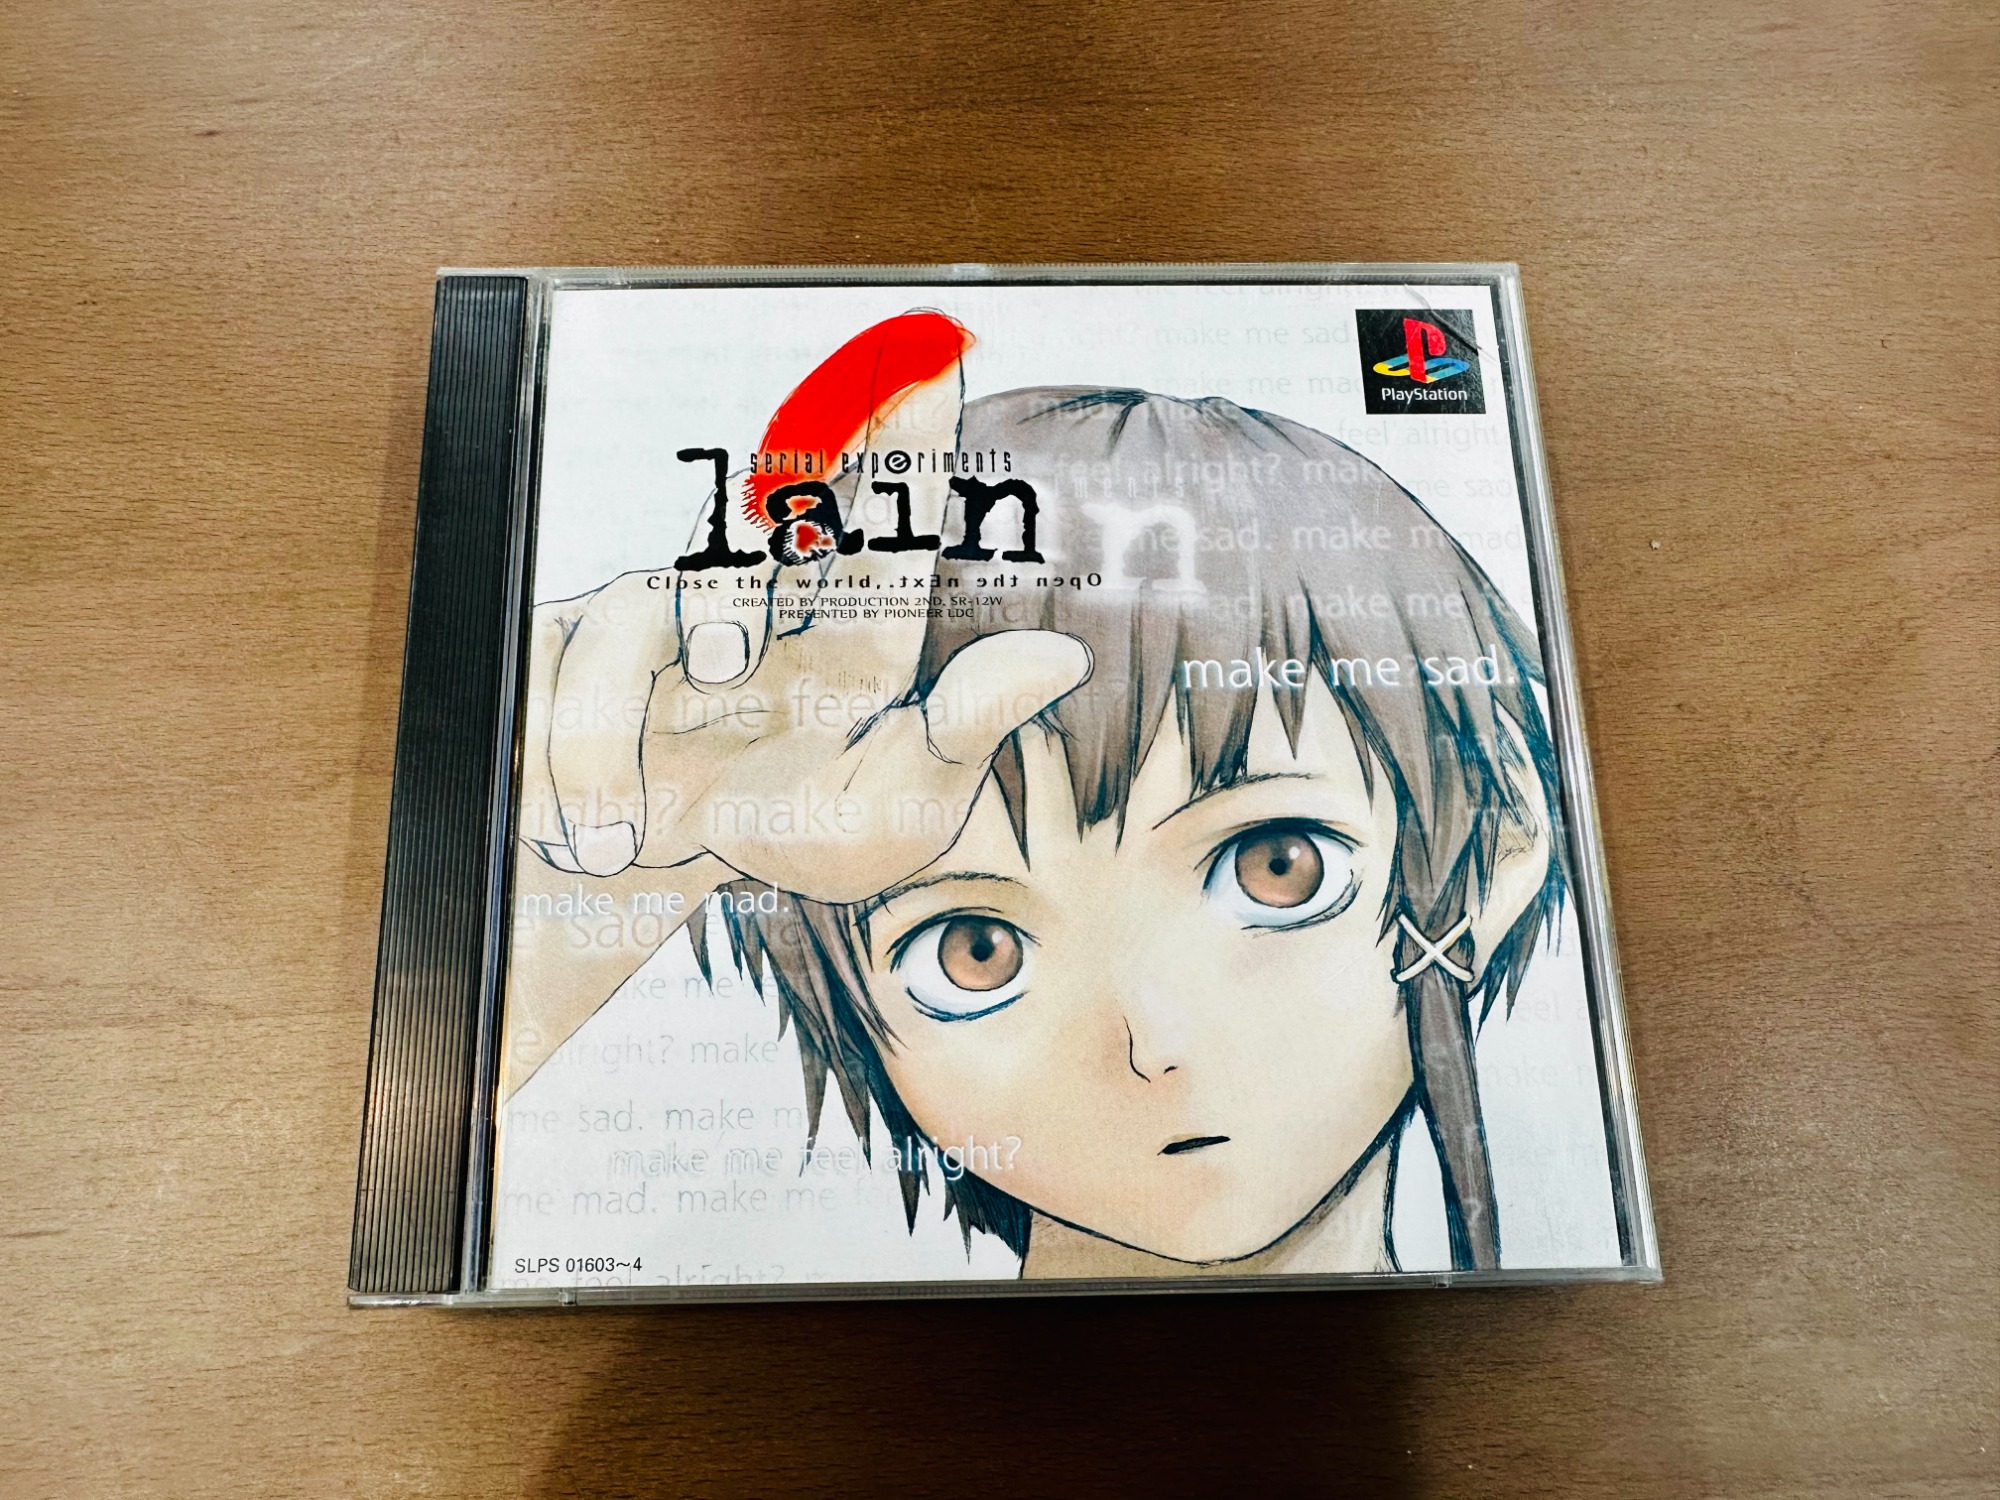 serial experiments lain ソフト 公式ガイド セット